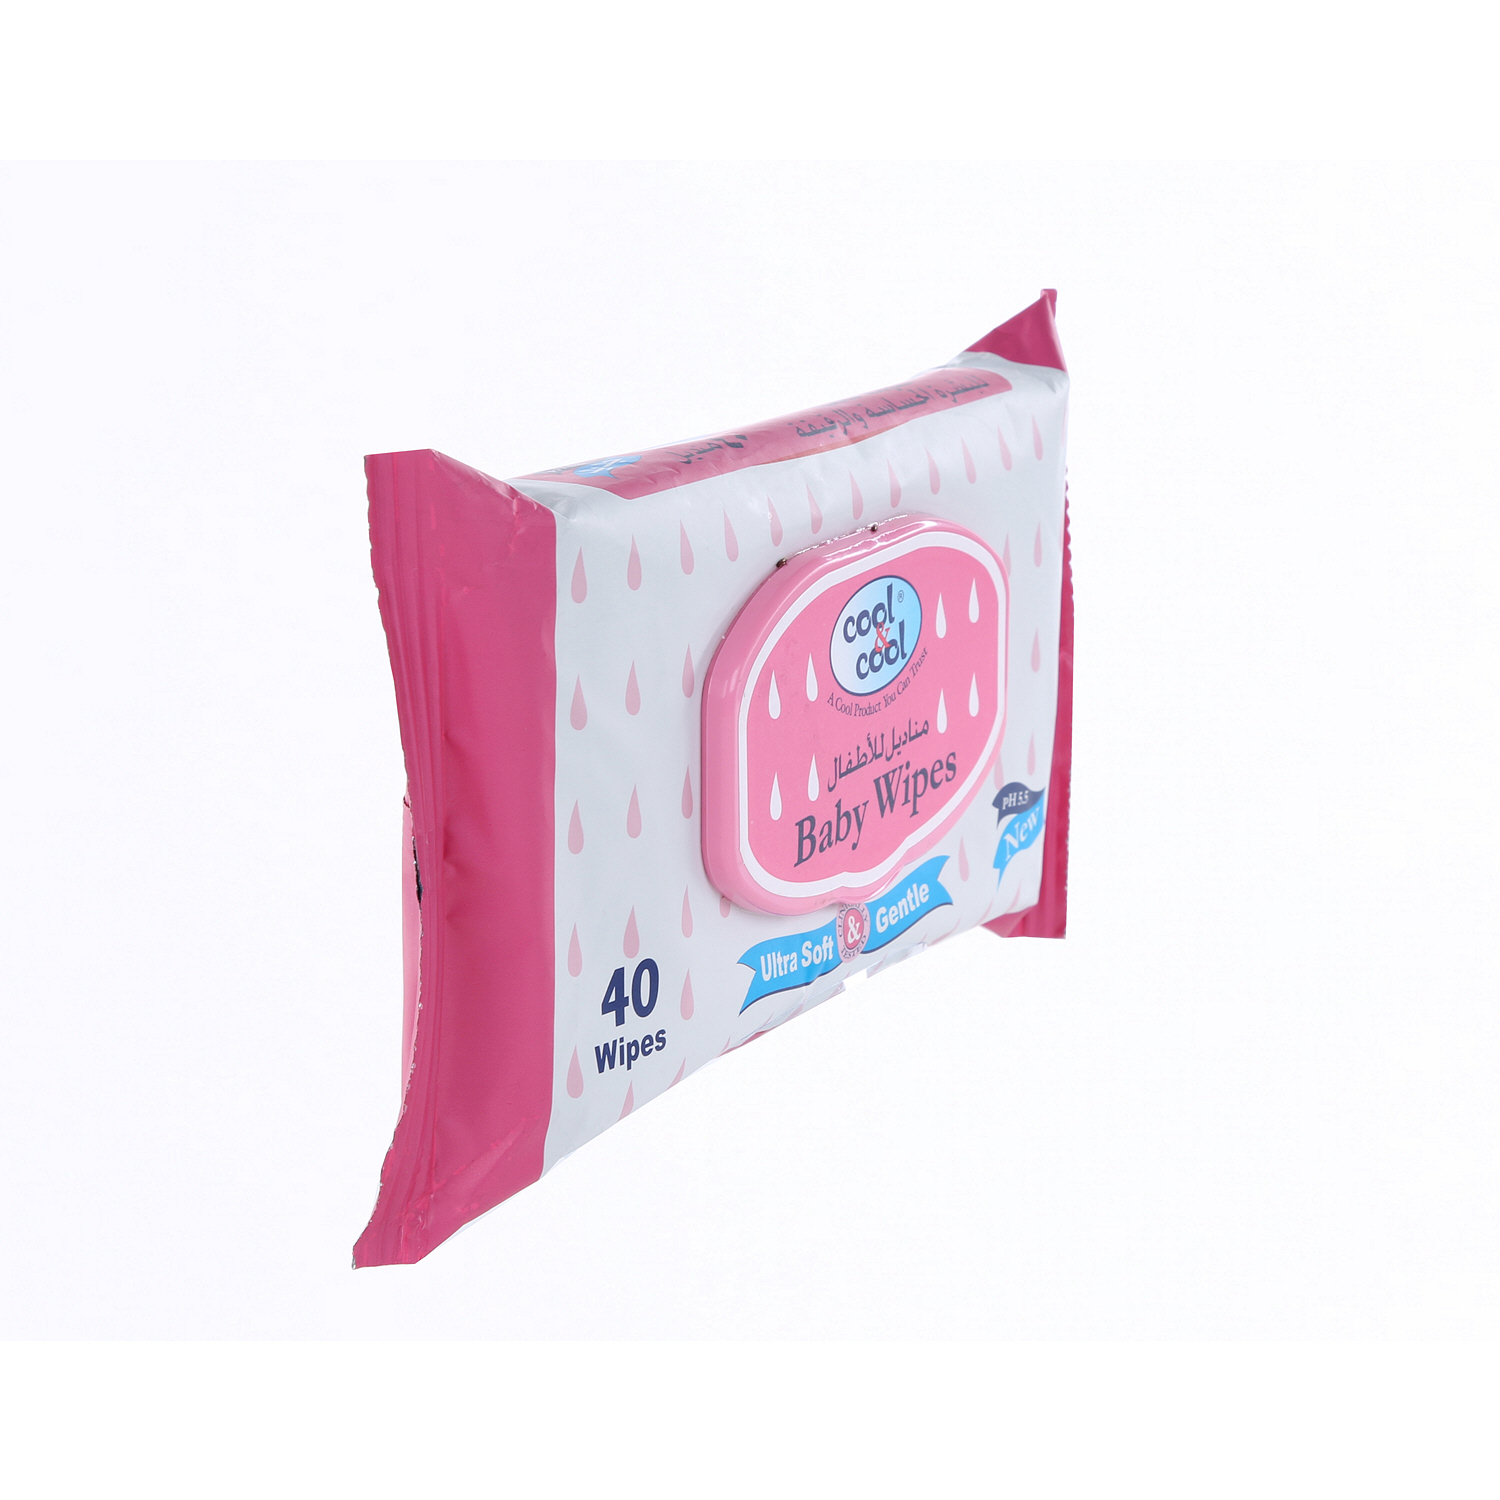 Cool & Cool Regular Baby 40 Wipes